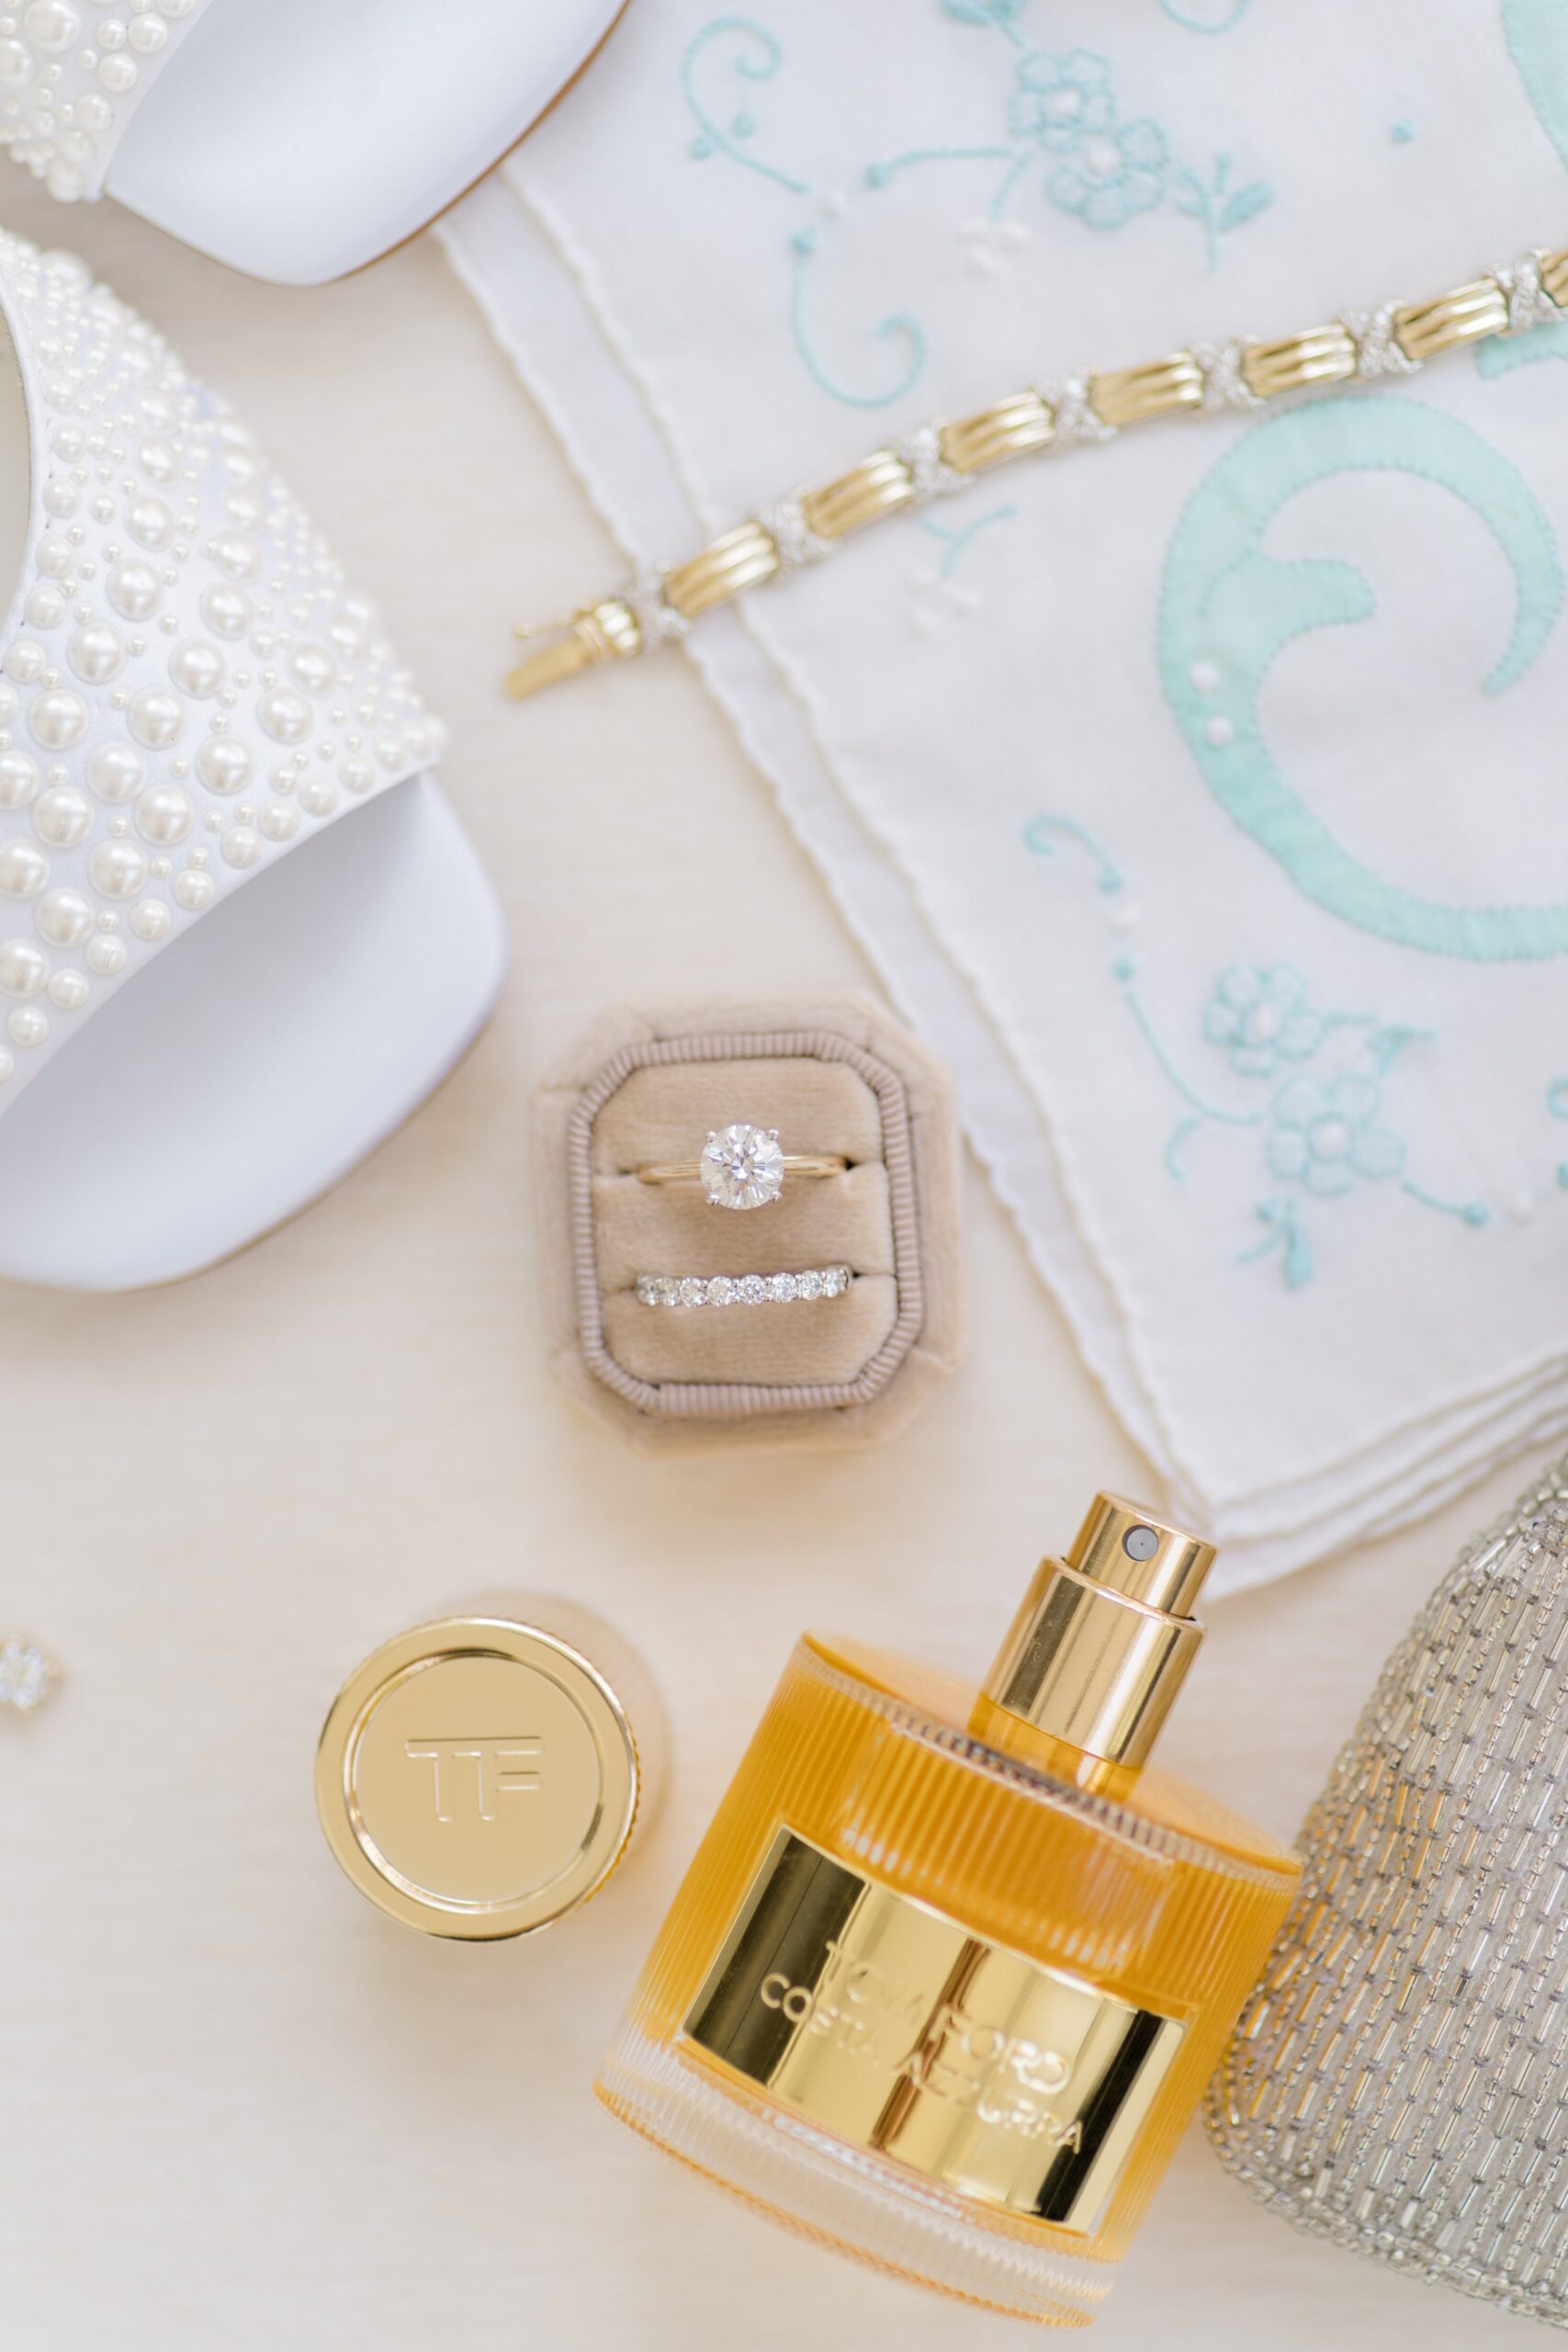 Mrs. ring box and bridal details with tom ford perfume